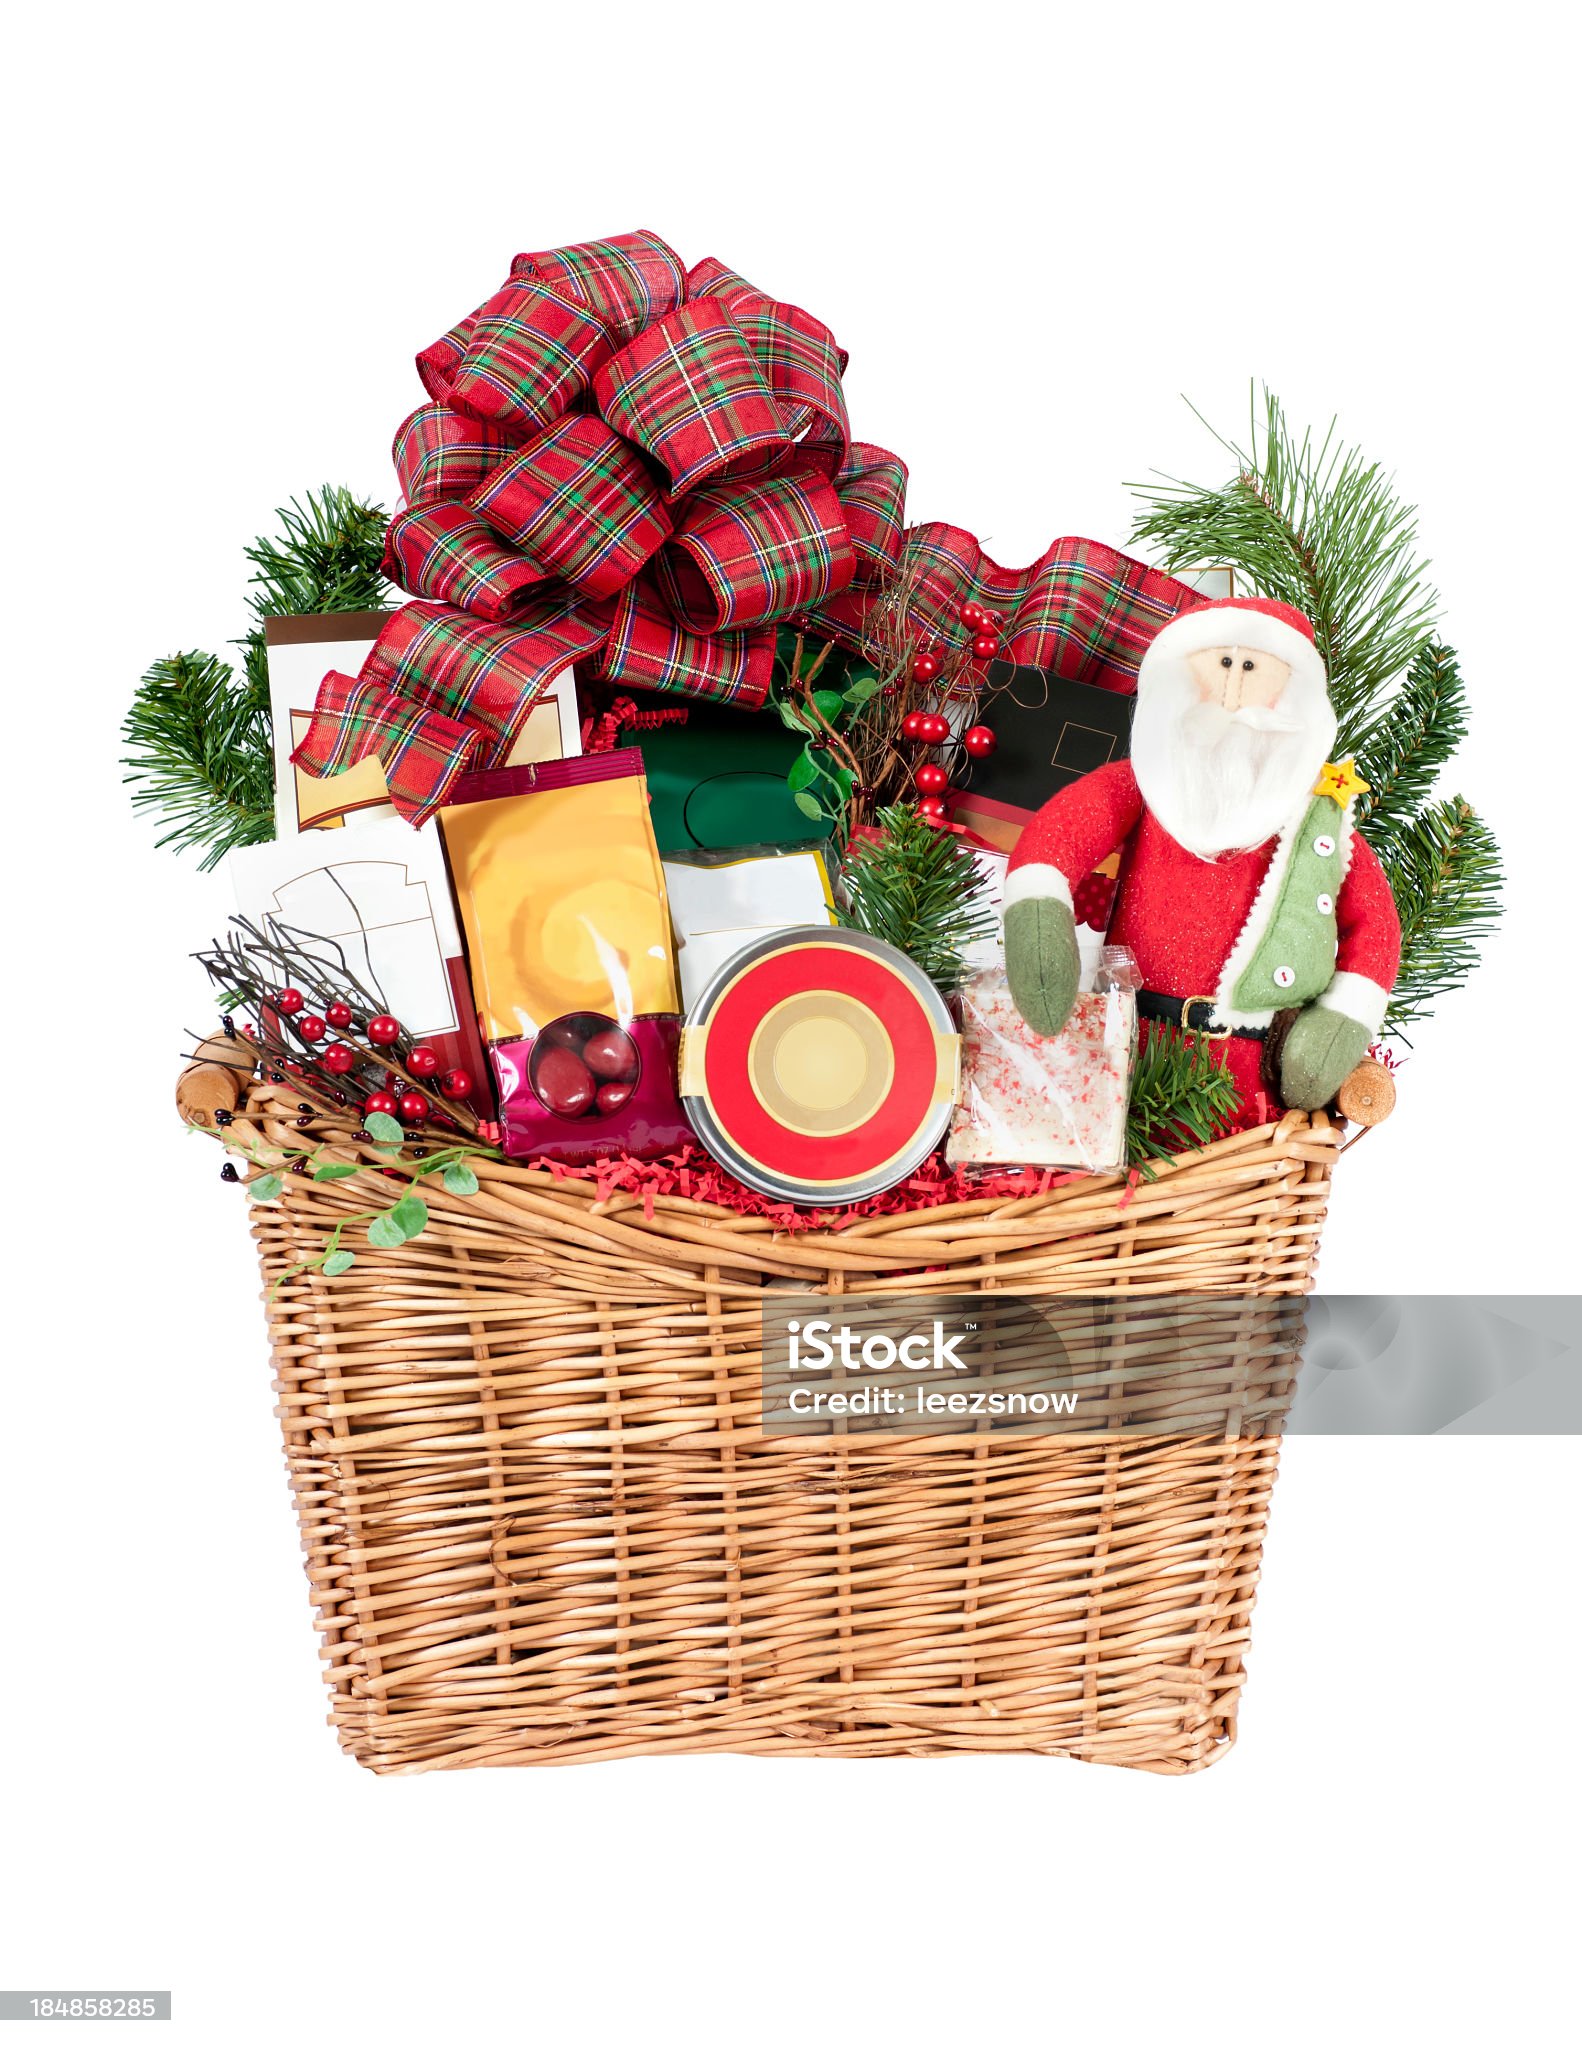 Christmas Gift Basket on White A festive holiday gift basket filled with a variety of goodies including Santa Claus. Isolated on white. Basket Stock Photo